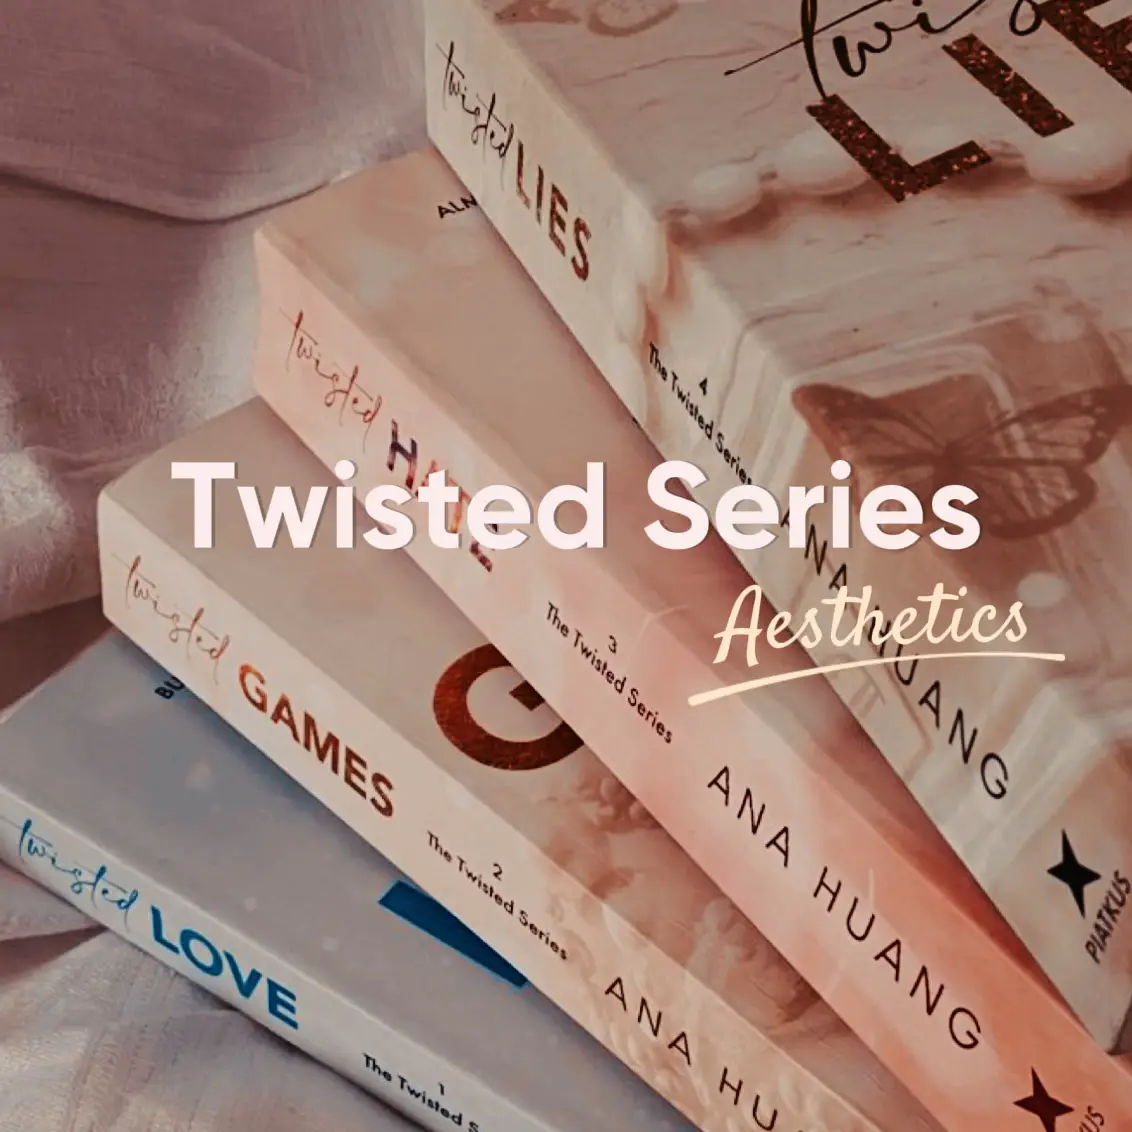 Book Review: Twisted Love (Twisted Series Book 1) by Ana Huang 𝗥𝗮𝘁𝗶𝗻𝗴  🌶🌶🌶🌶🌶 𝗥𝗲𝘃𝗶𝗲𝘄 I saw the low rating of this book on…